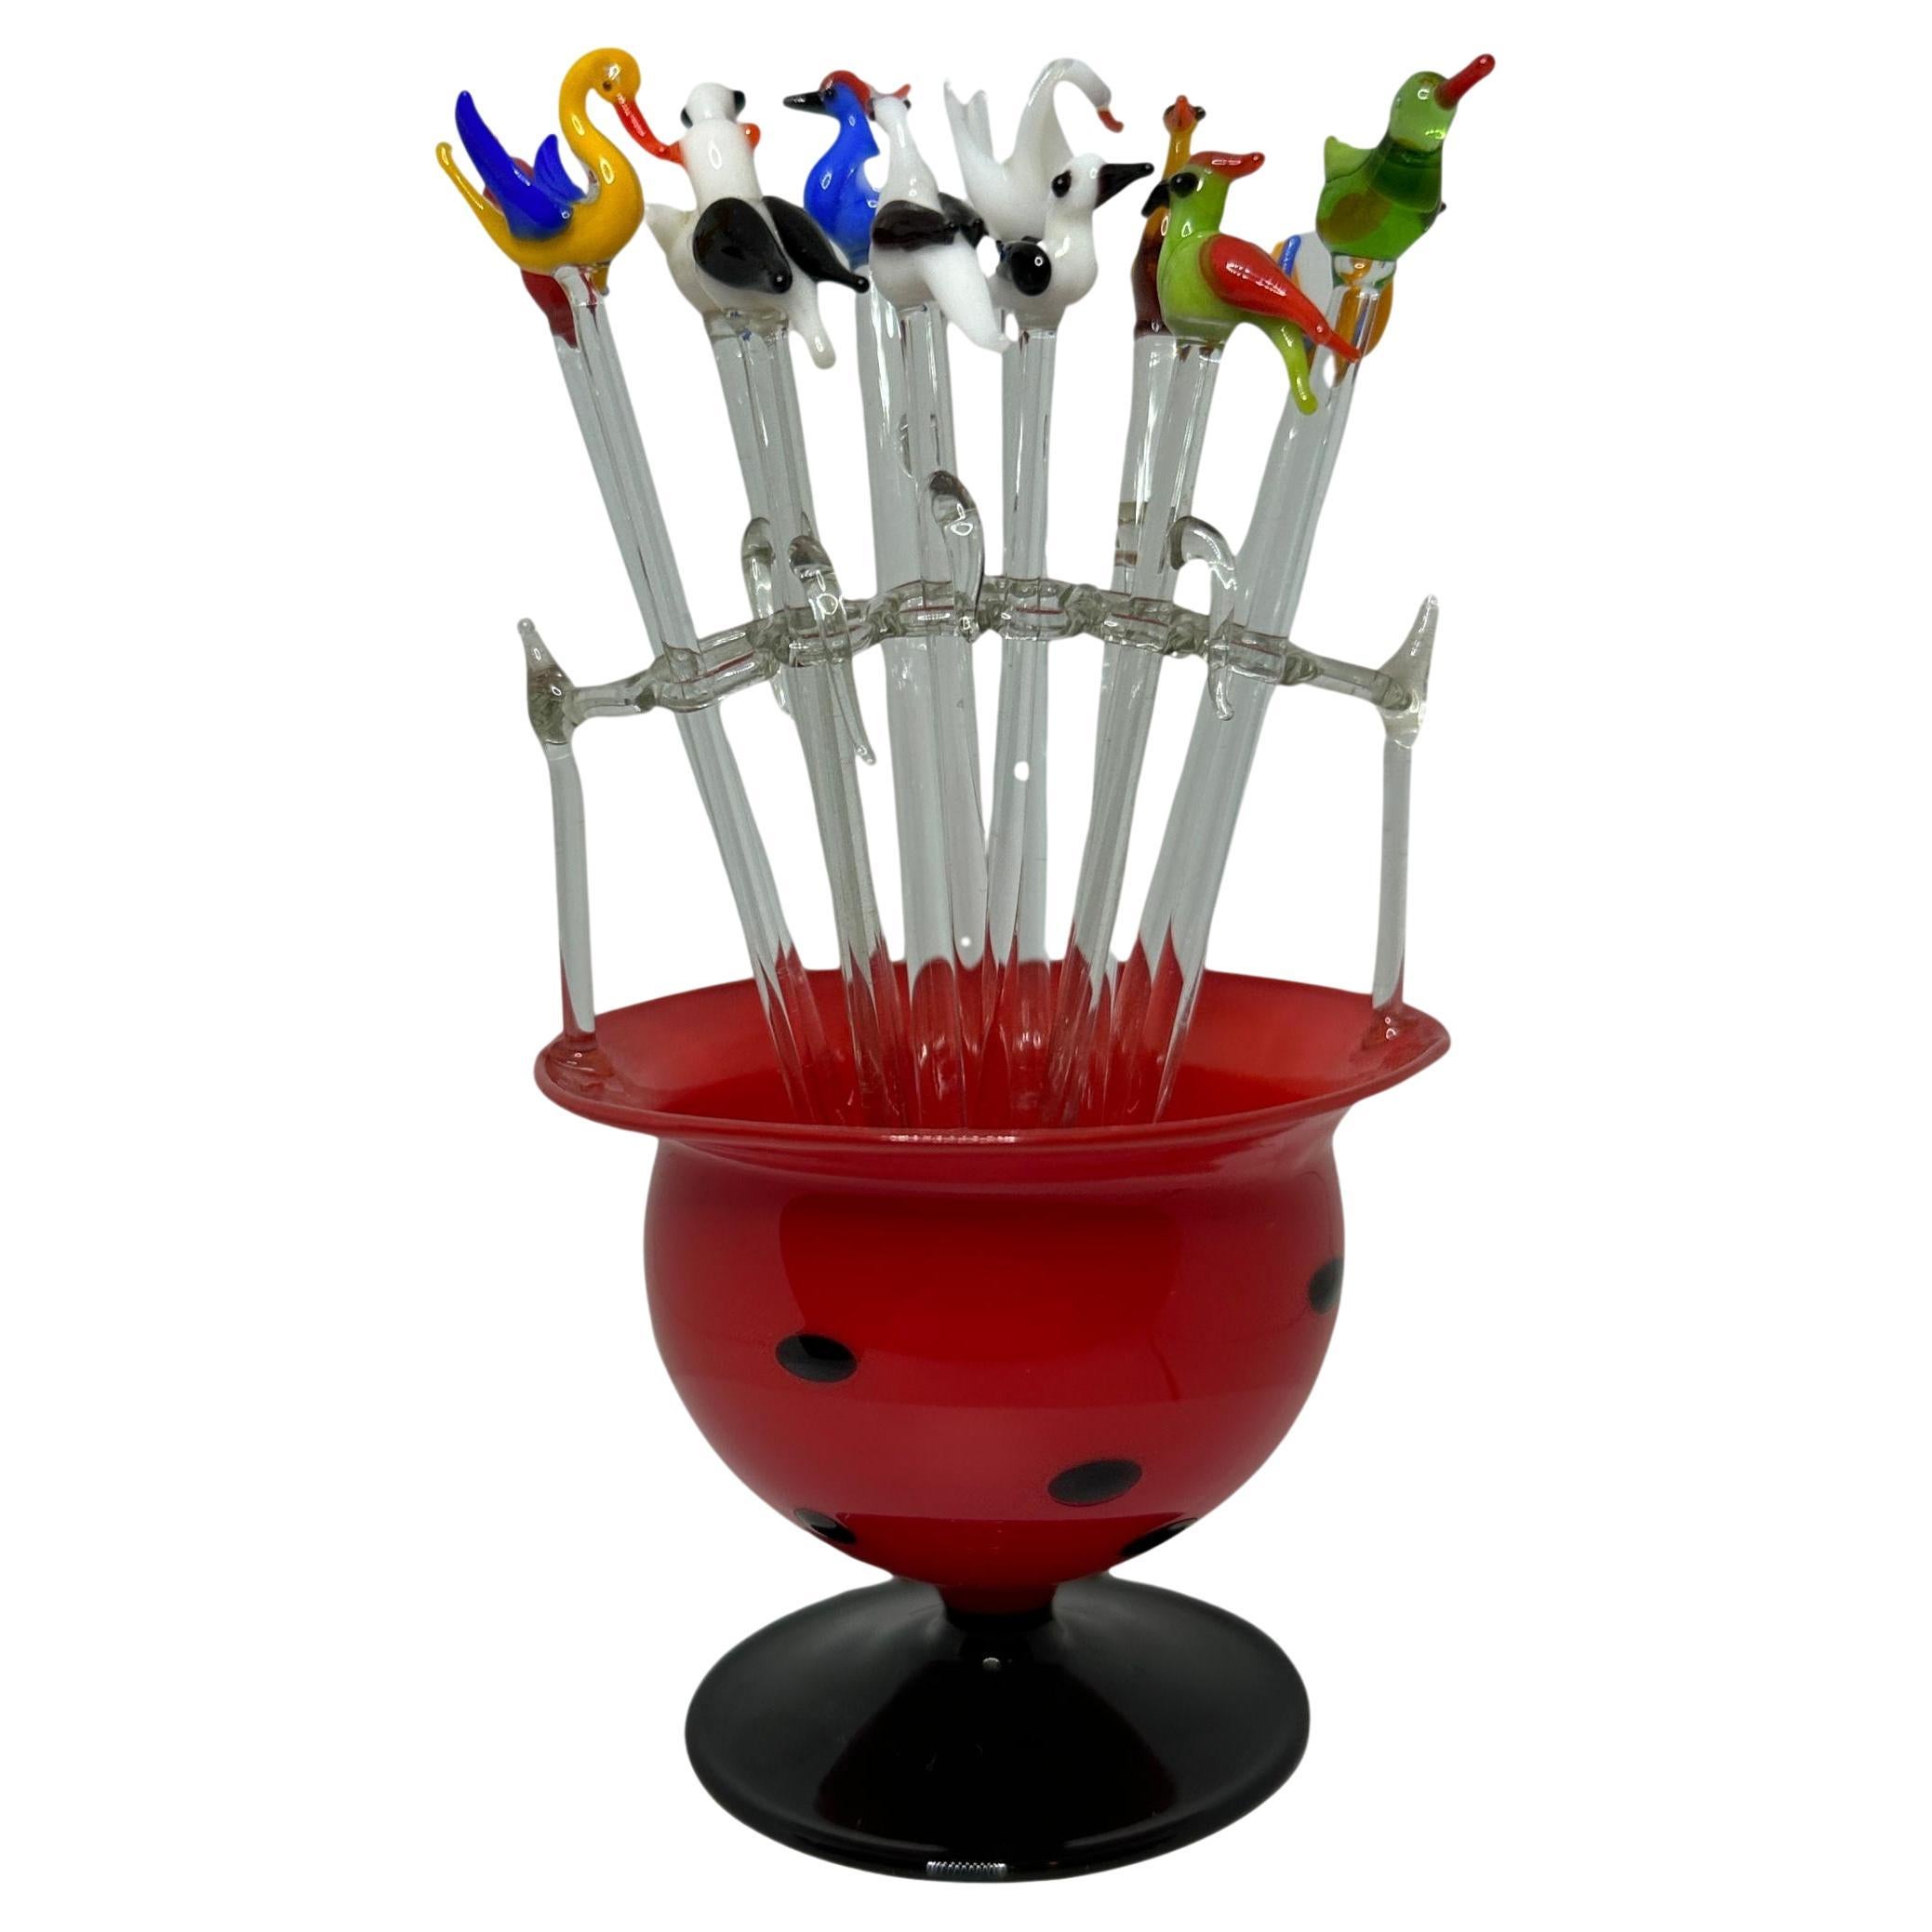 Bimini Glass Cocktail Picks with Red Bowl Stand, 1920s, Vienna Austria For Sale